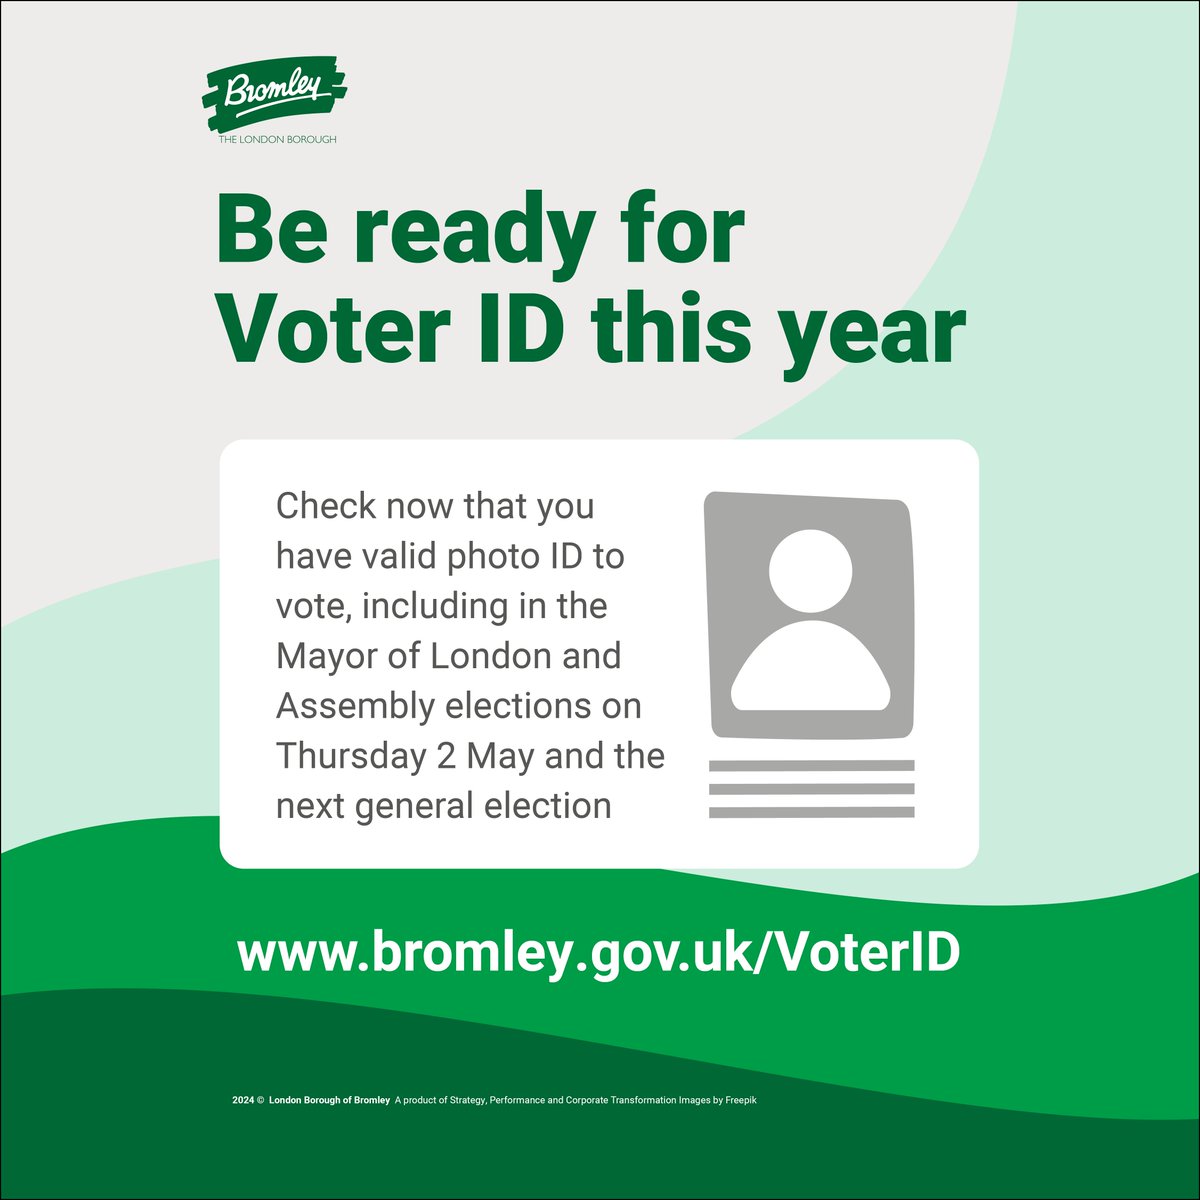 Have you got photo ID for the London elections? You need photo ID to vote for London Mayor and your London Assembly members on 2 May. If you don't have any, apply for an alternative now. Find key information about the election at bromley.gov.uk/elections-voti… #LondonVotes